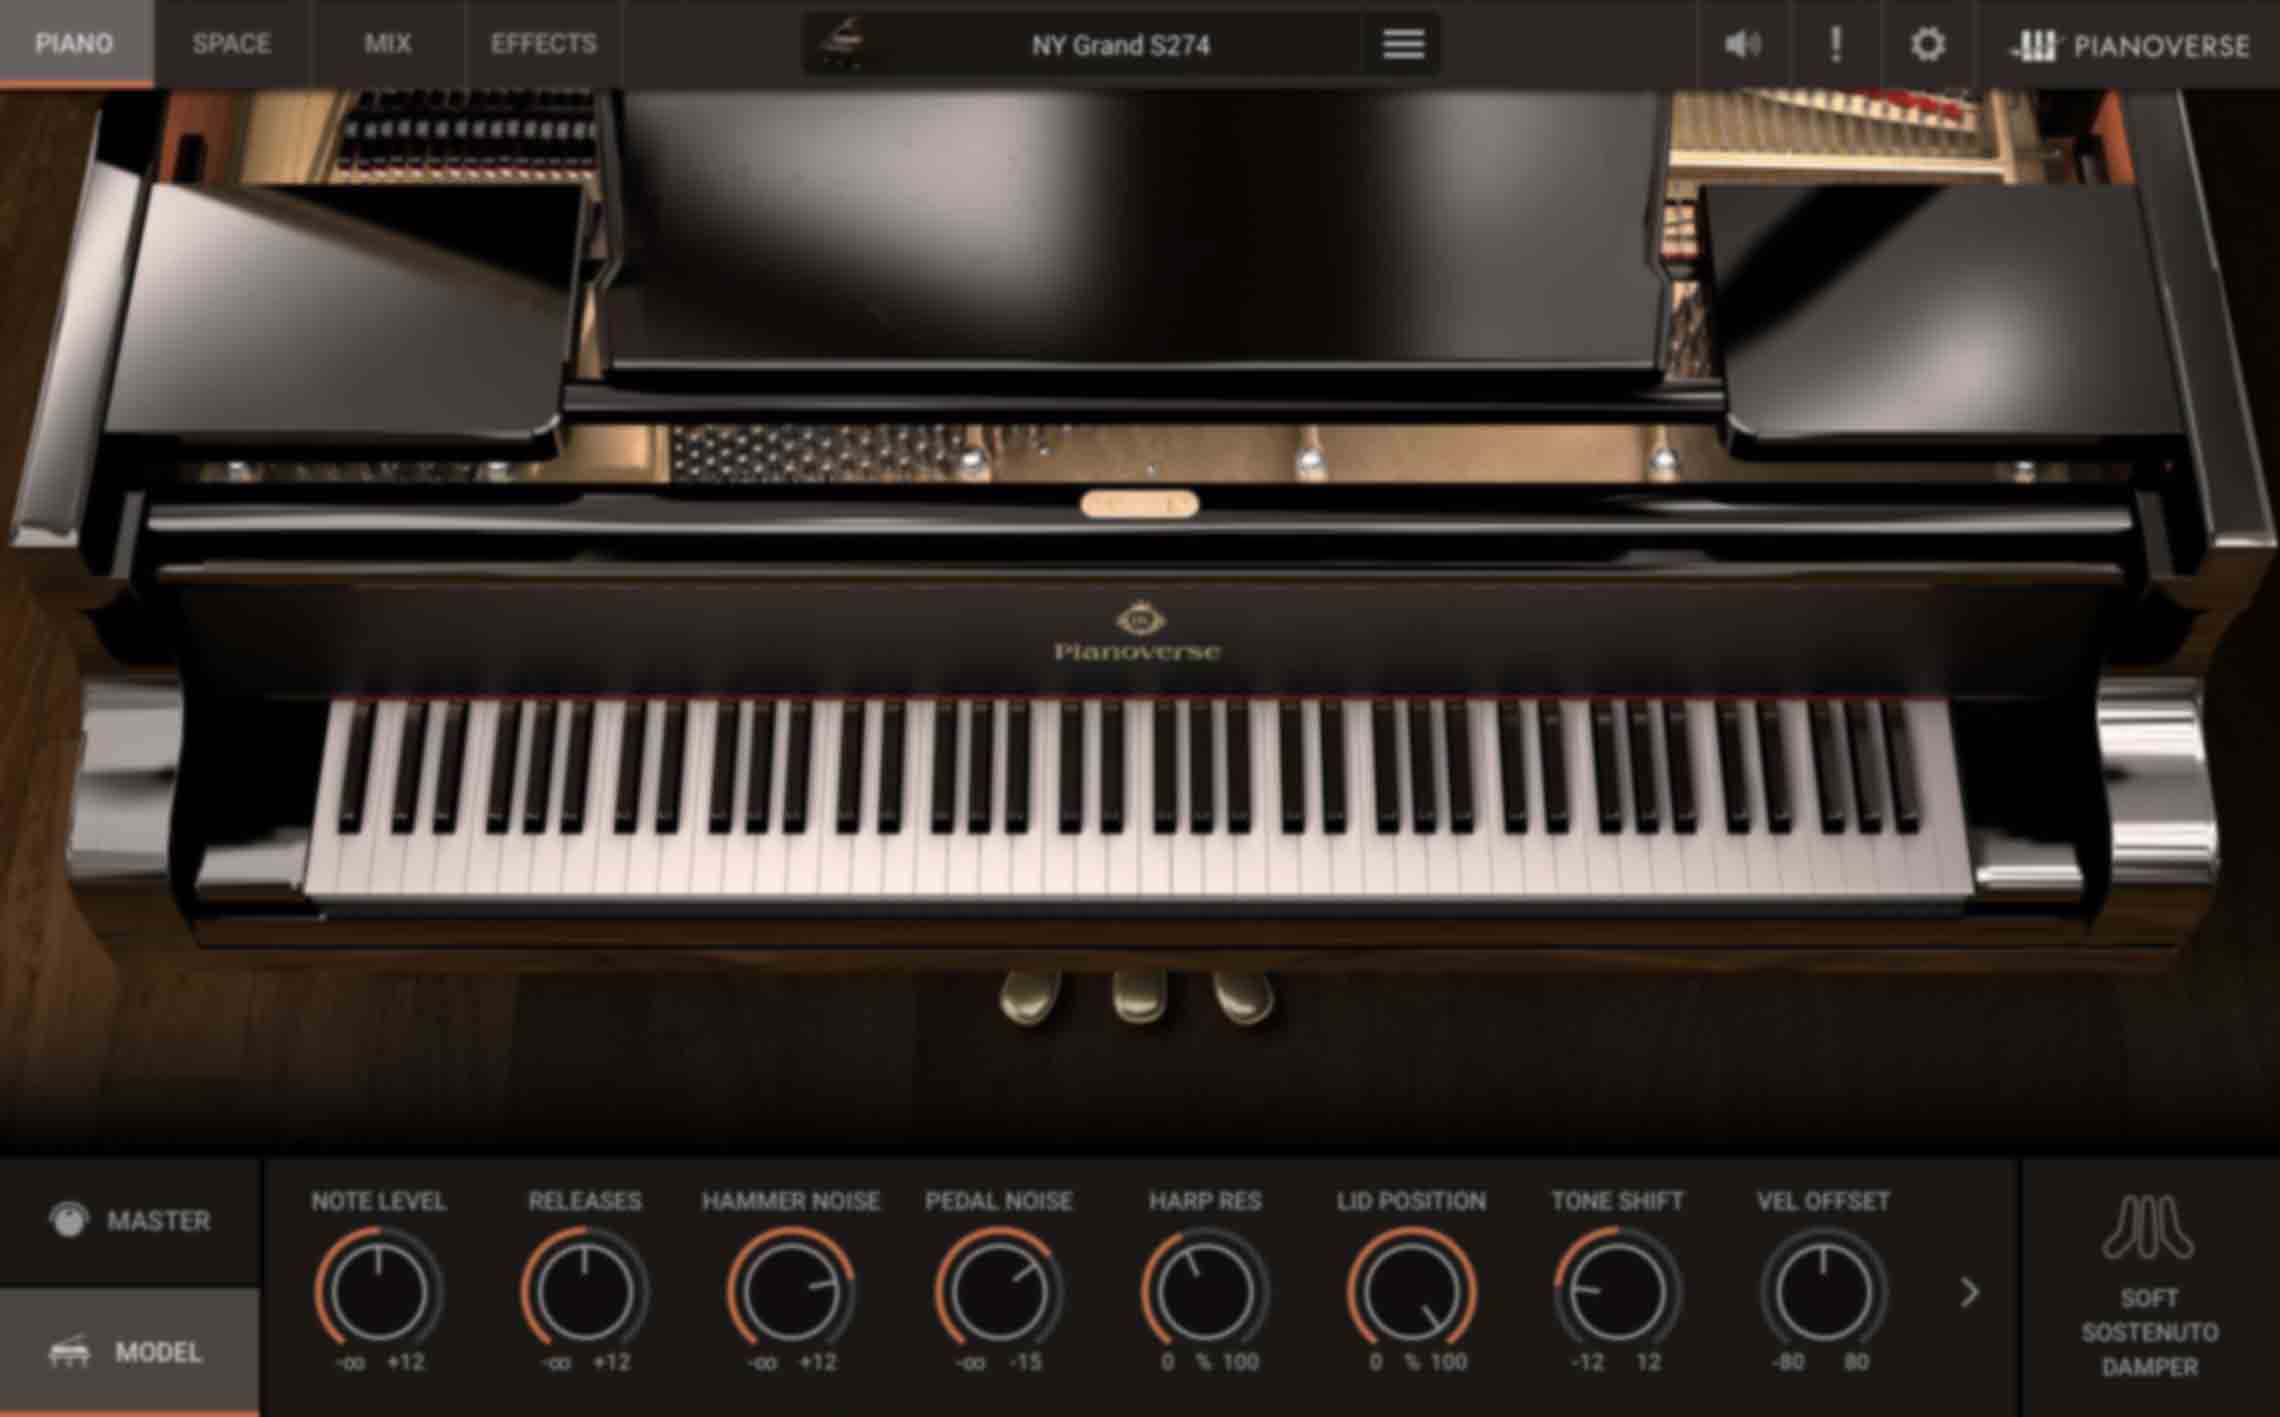 PIANO/MODEL - Offers advanced controls for each piano’s physical attributes